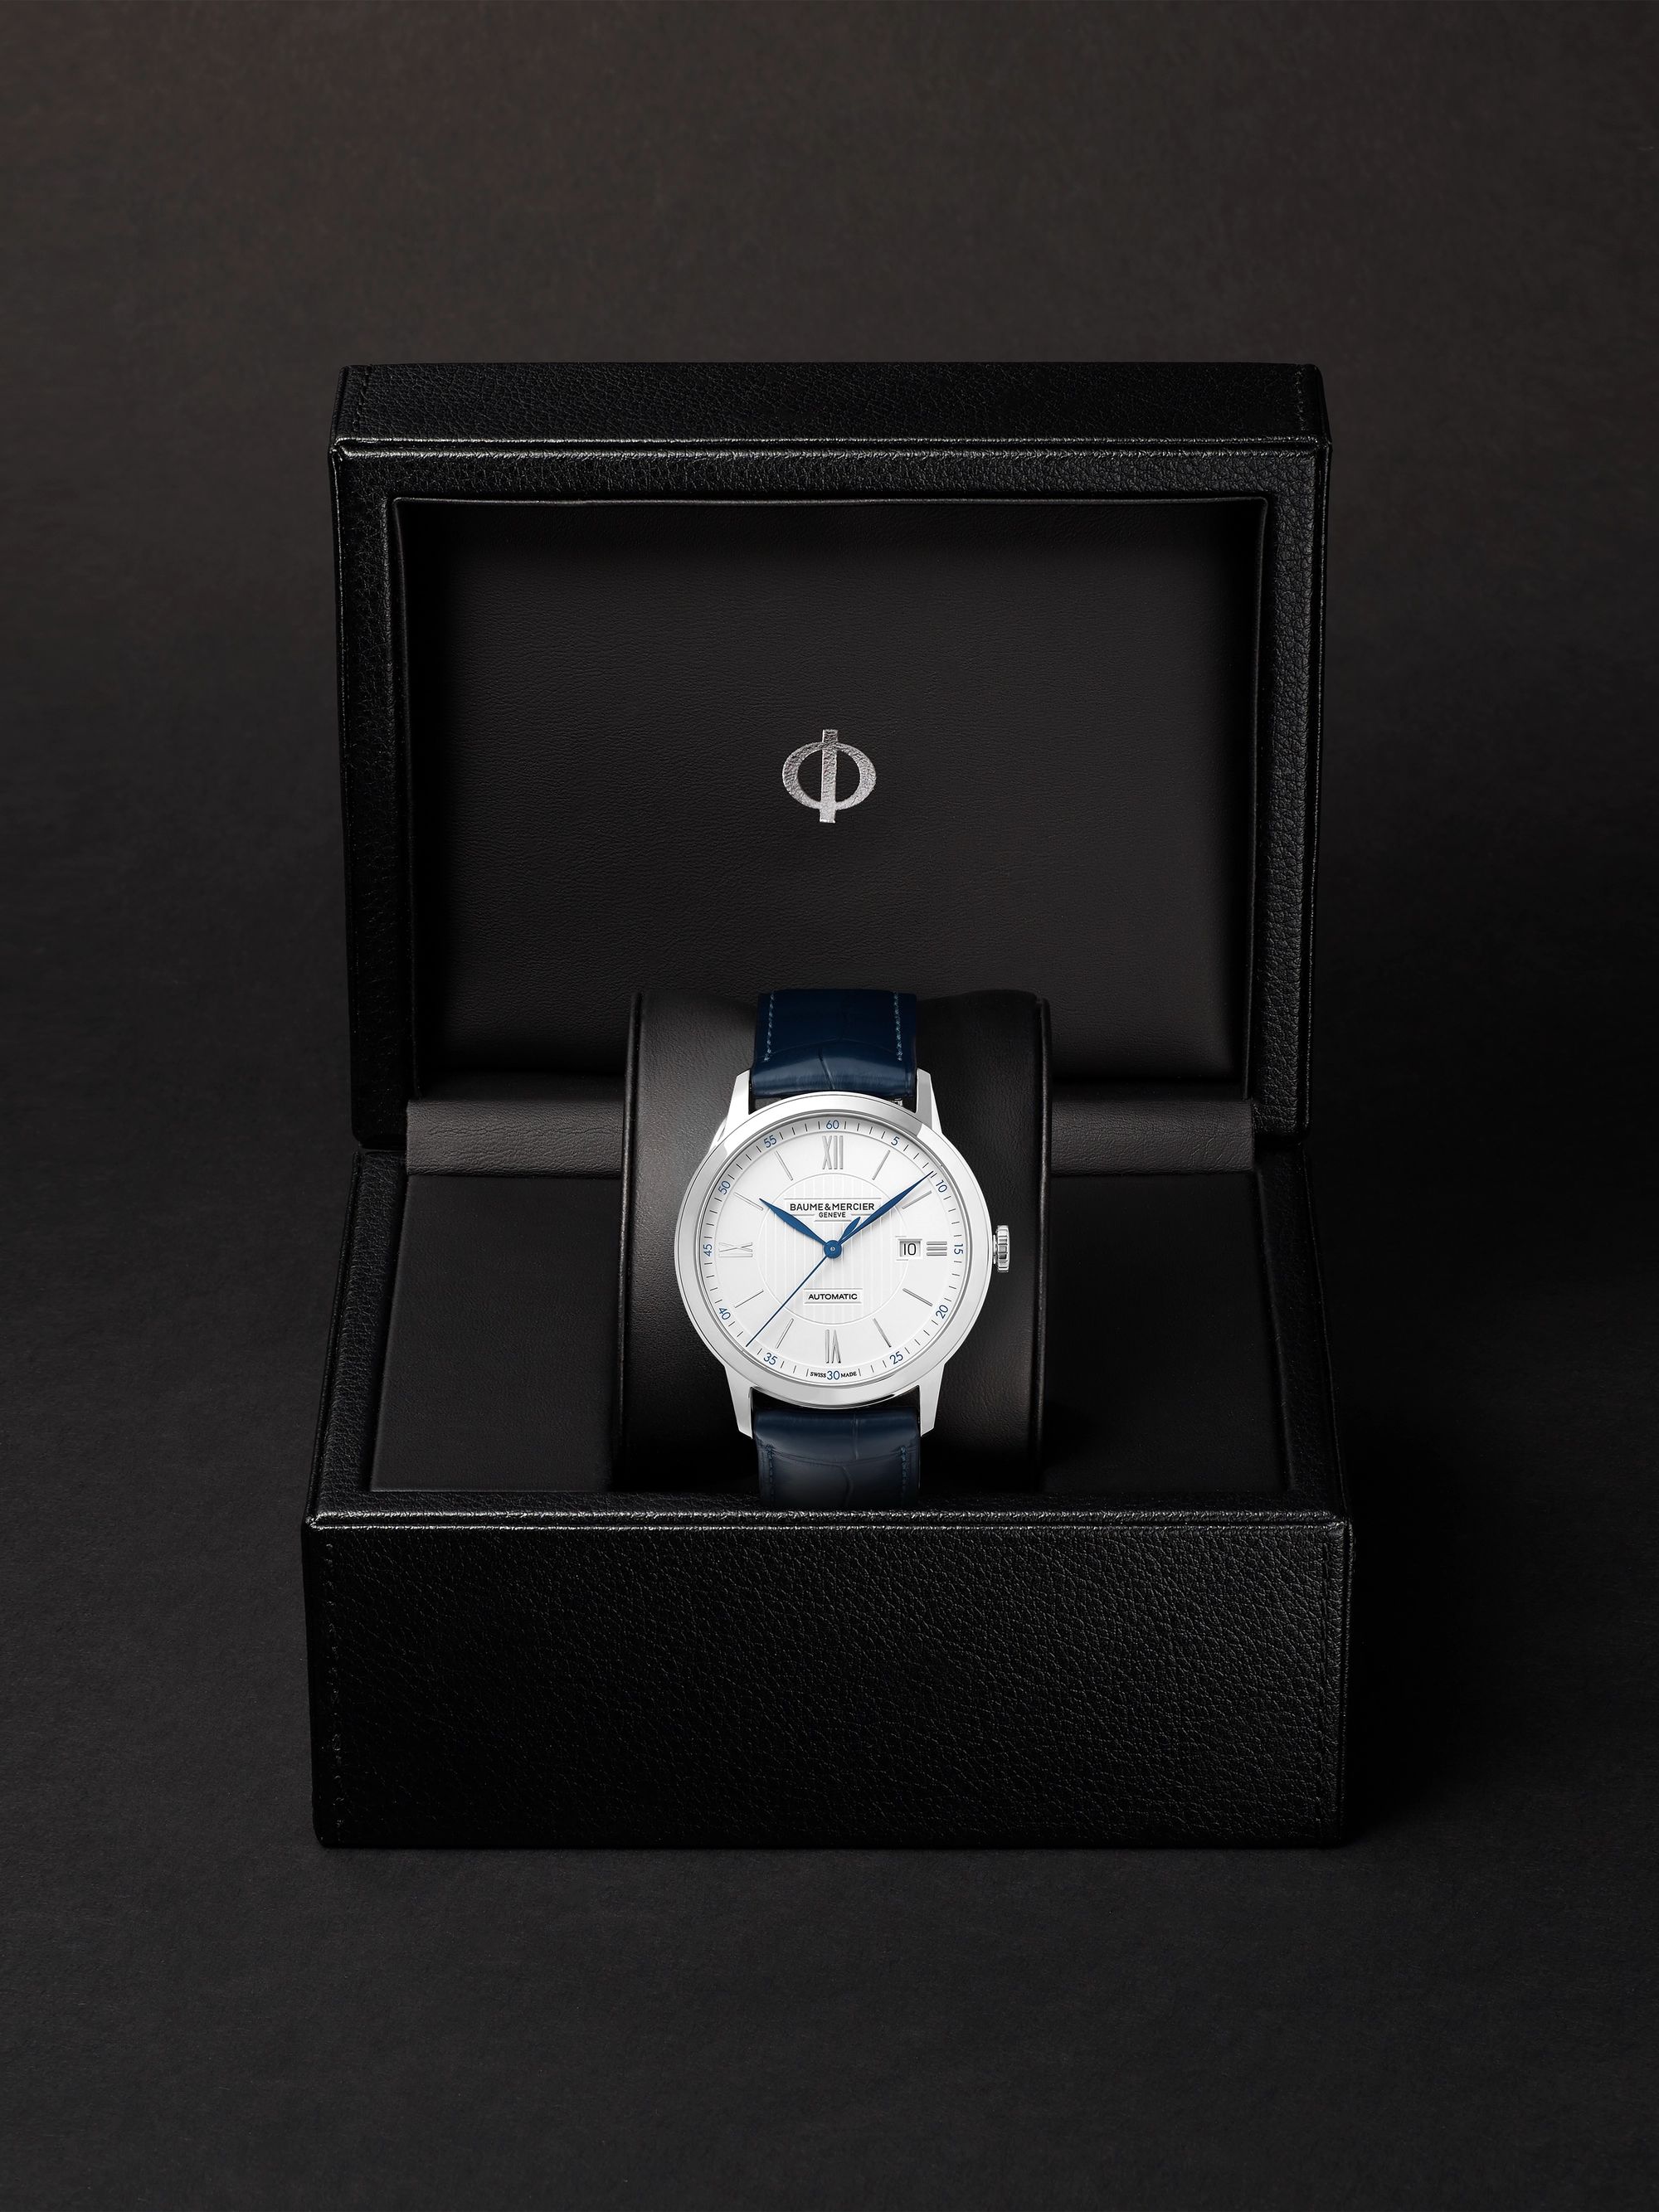 BAUME & MERCIER Classima Automatic 42mm Stainless Steel and Alligator Watch, Ref. No. 10333